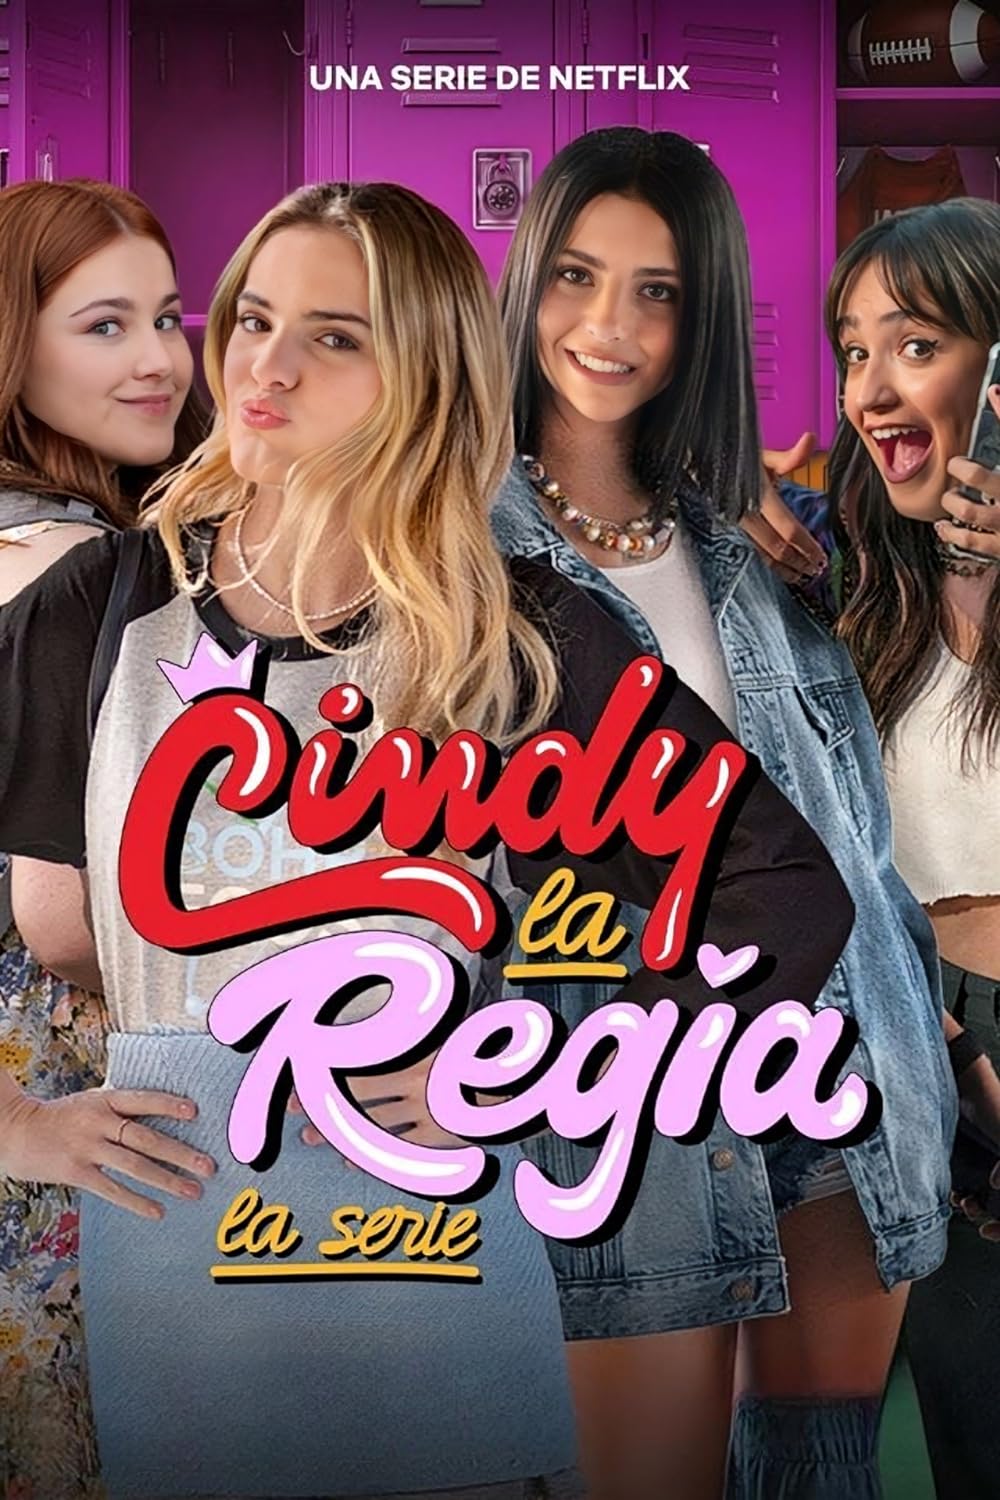 Cindy la Regia: The High School Years (December 20) - Streaming on NetflixCindy la Regia: The High School Years dives into the spirited life of Cindy, an ambitious teenager navigating the challenges of a coeducational high school in San Pedro Garza García's high society. Accompanied by friends Lu, Tere, and cousin Angie, Cindy confronts societal expectations and norms of love and status in this prequel to the 2020 film, 